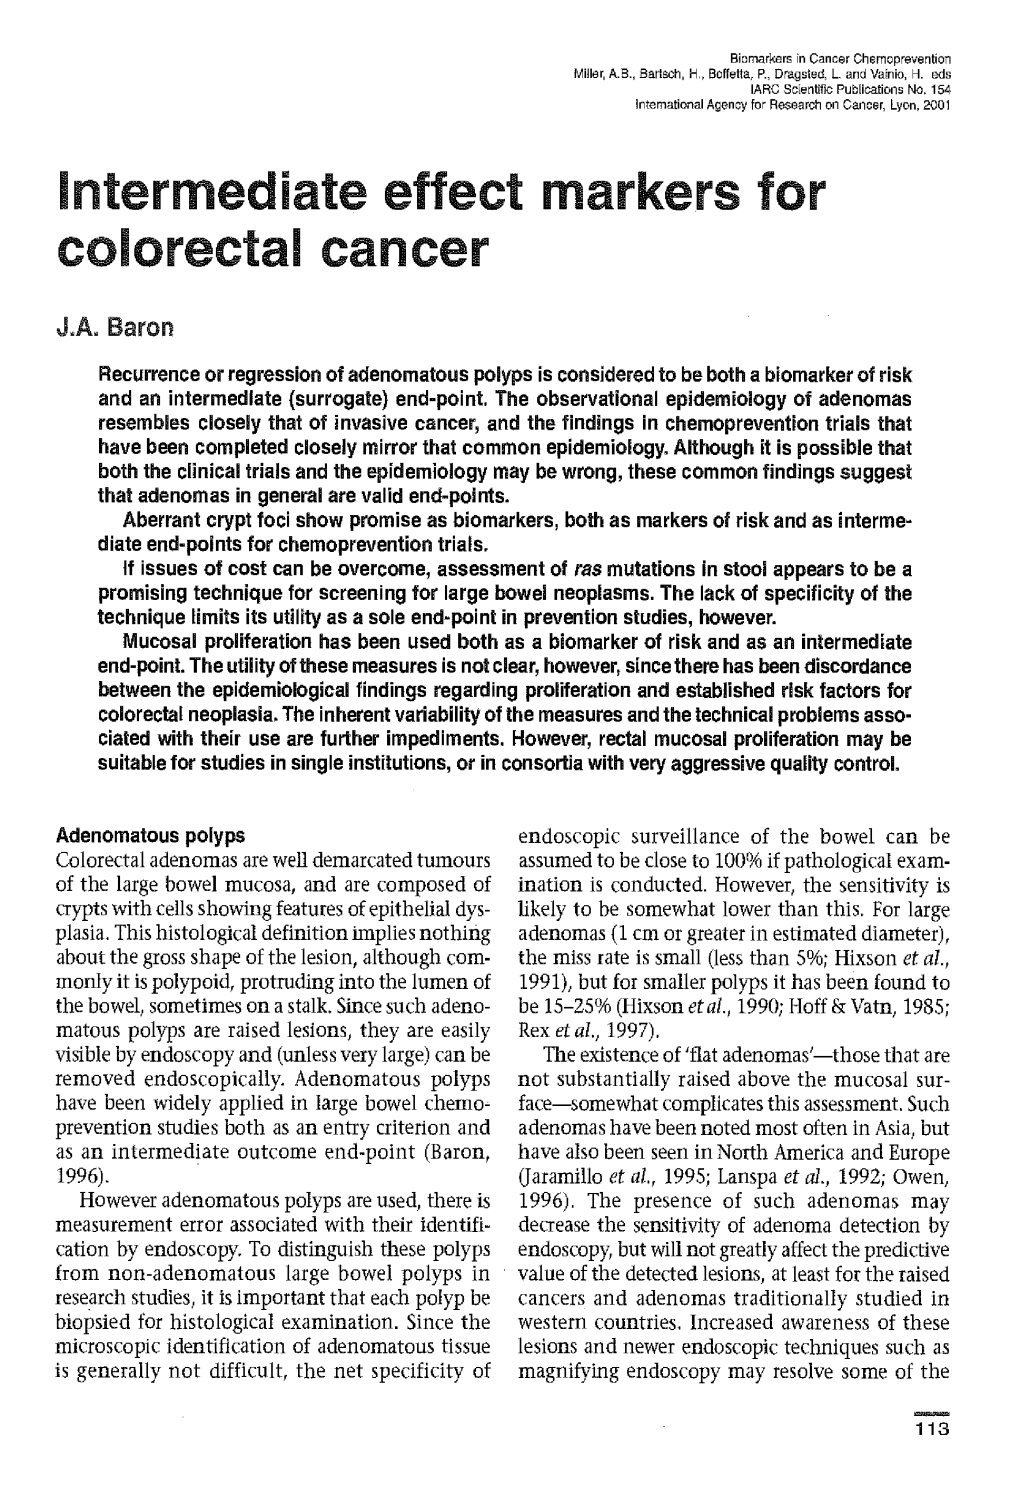 Intermediate Effect Markers for Colorectal Cancer